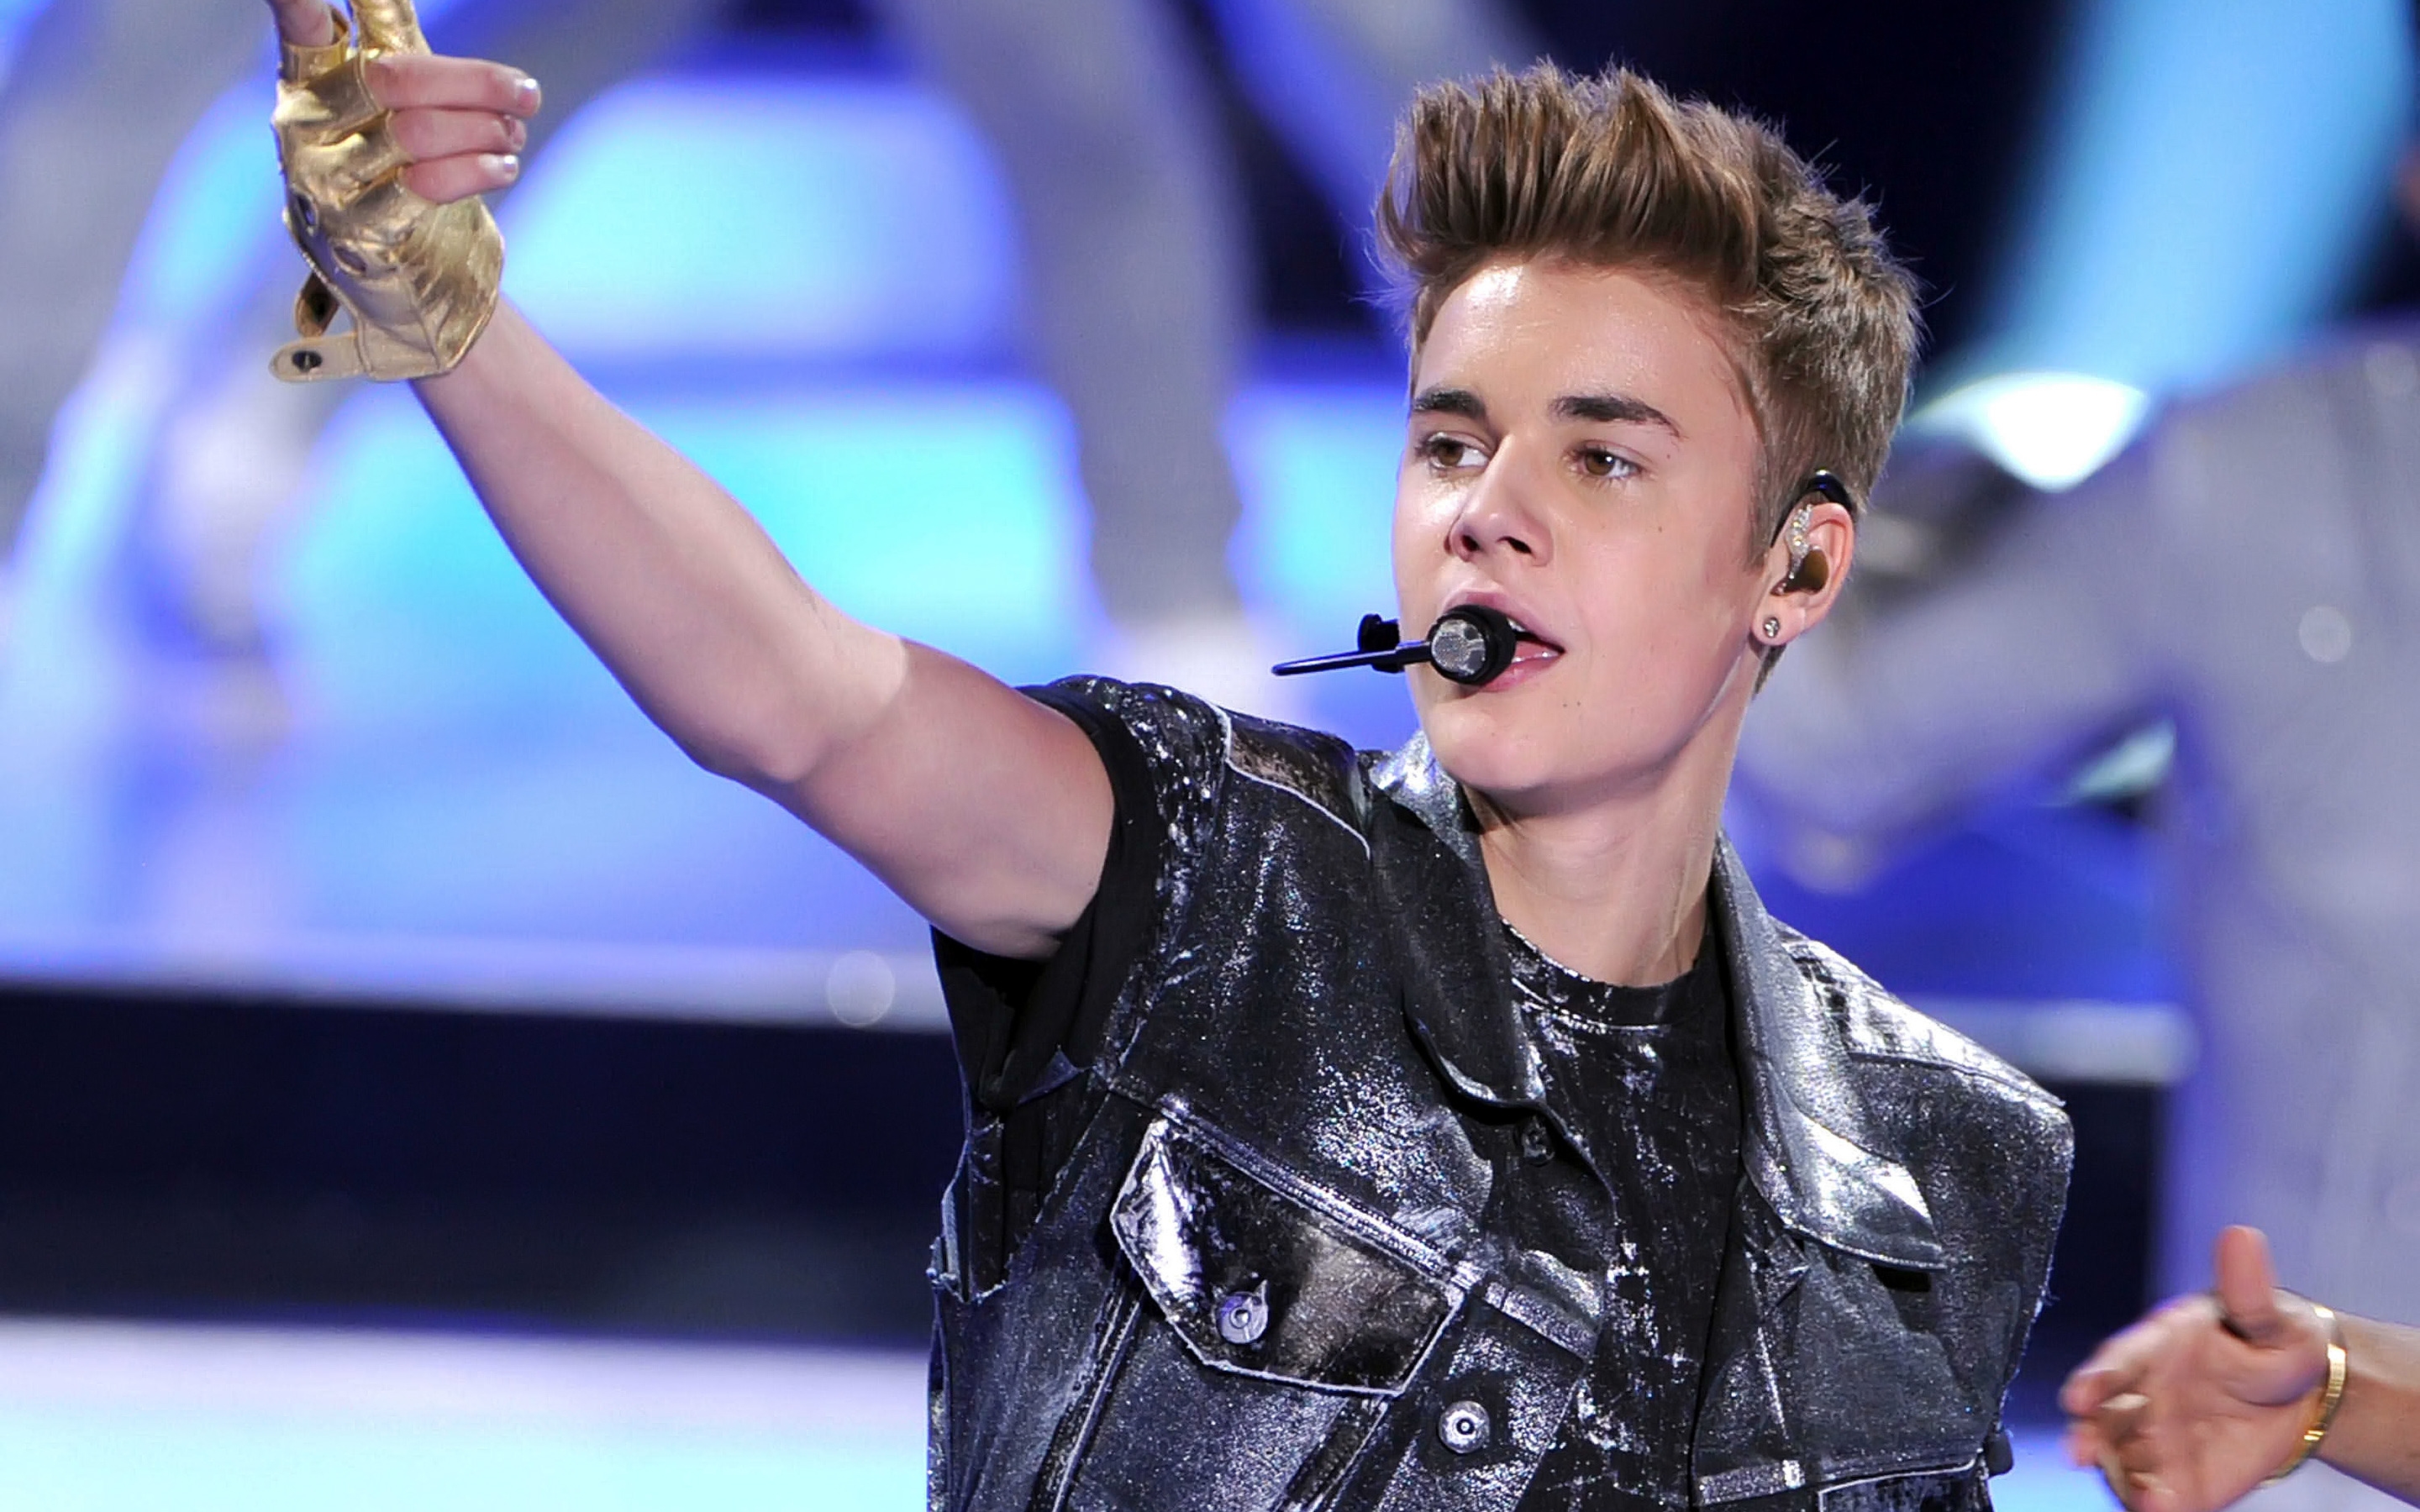 Justin Bieber on Stage for 2880 x 1800 Retina Display resolution